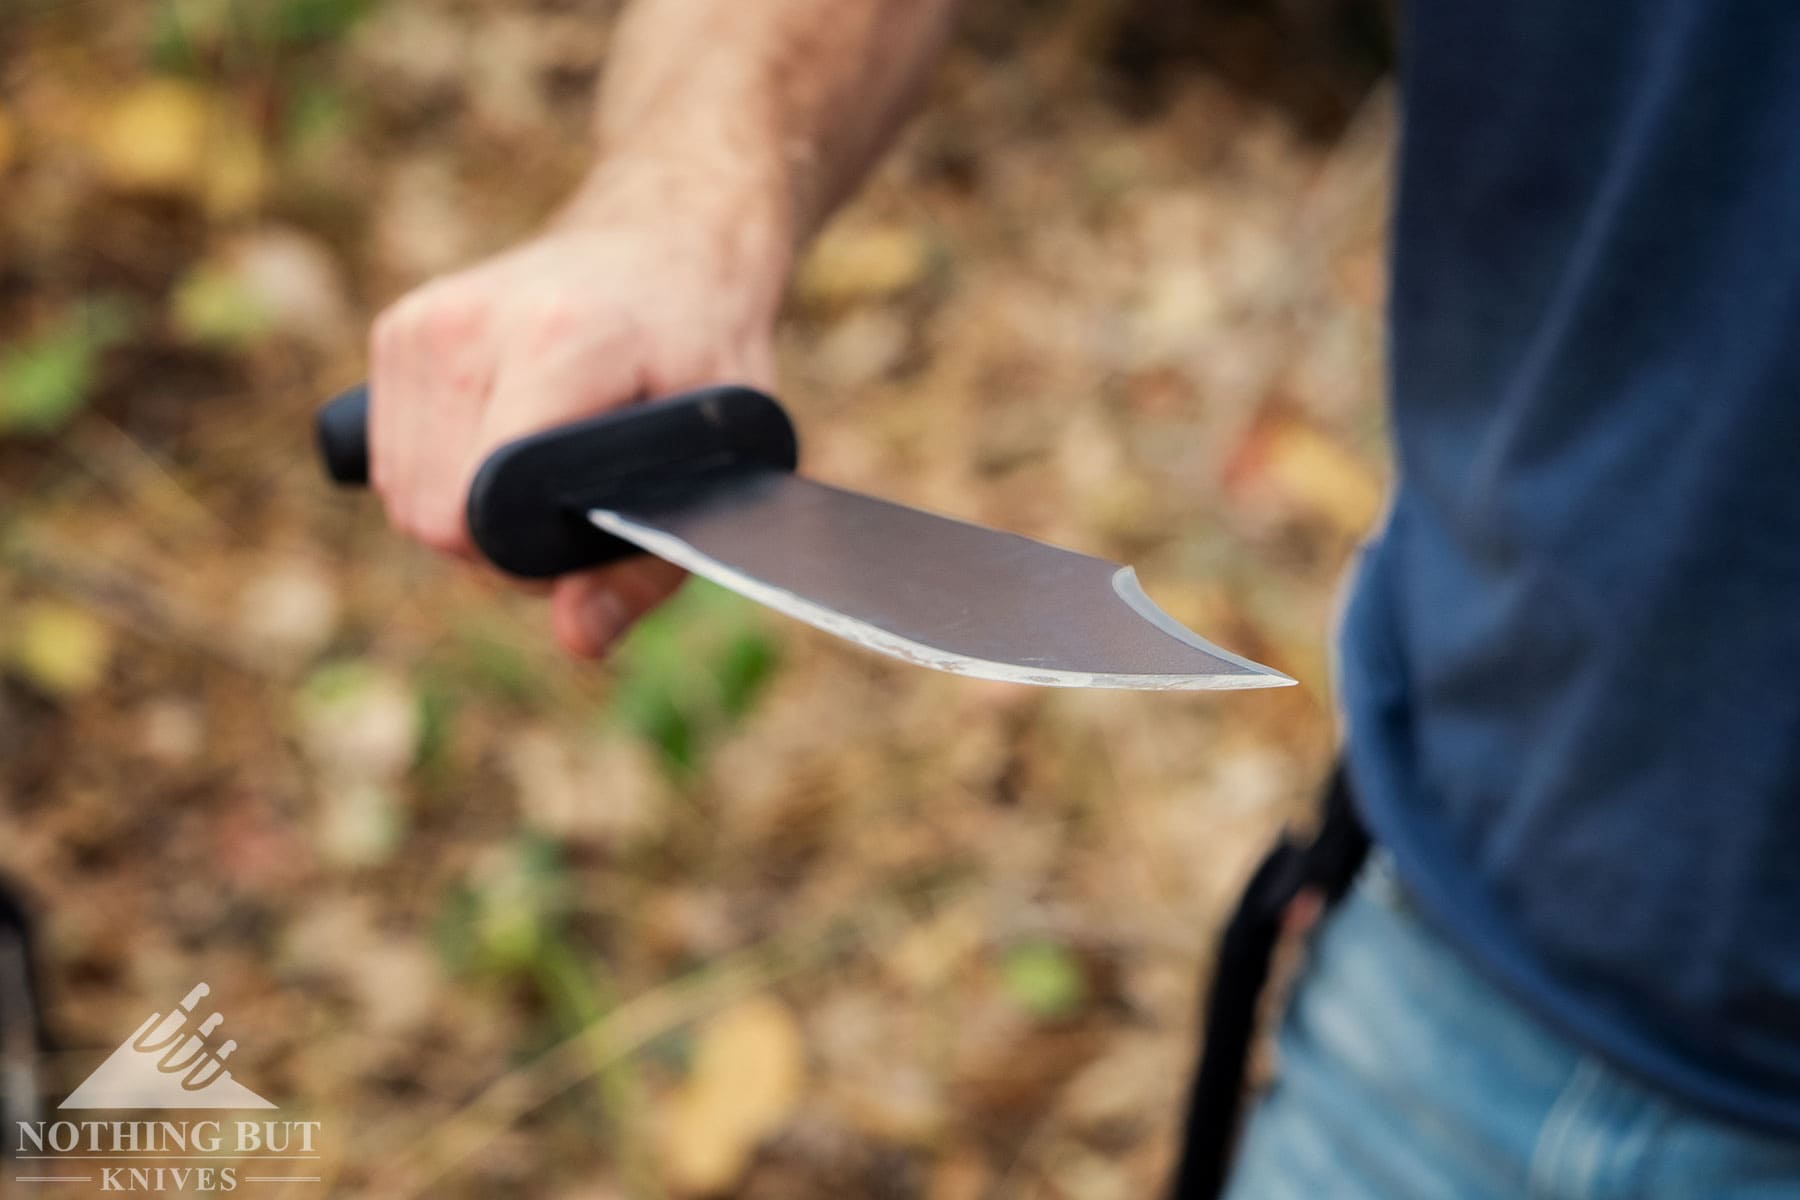 A close-up of the Cold Steel Black Bear Bowie blade with its edge facing the camera to show the grind.